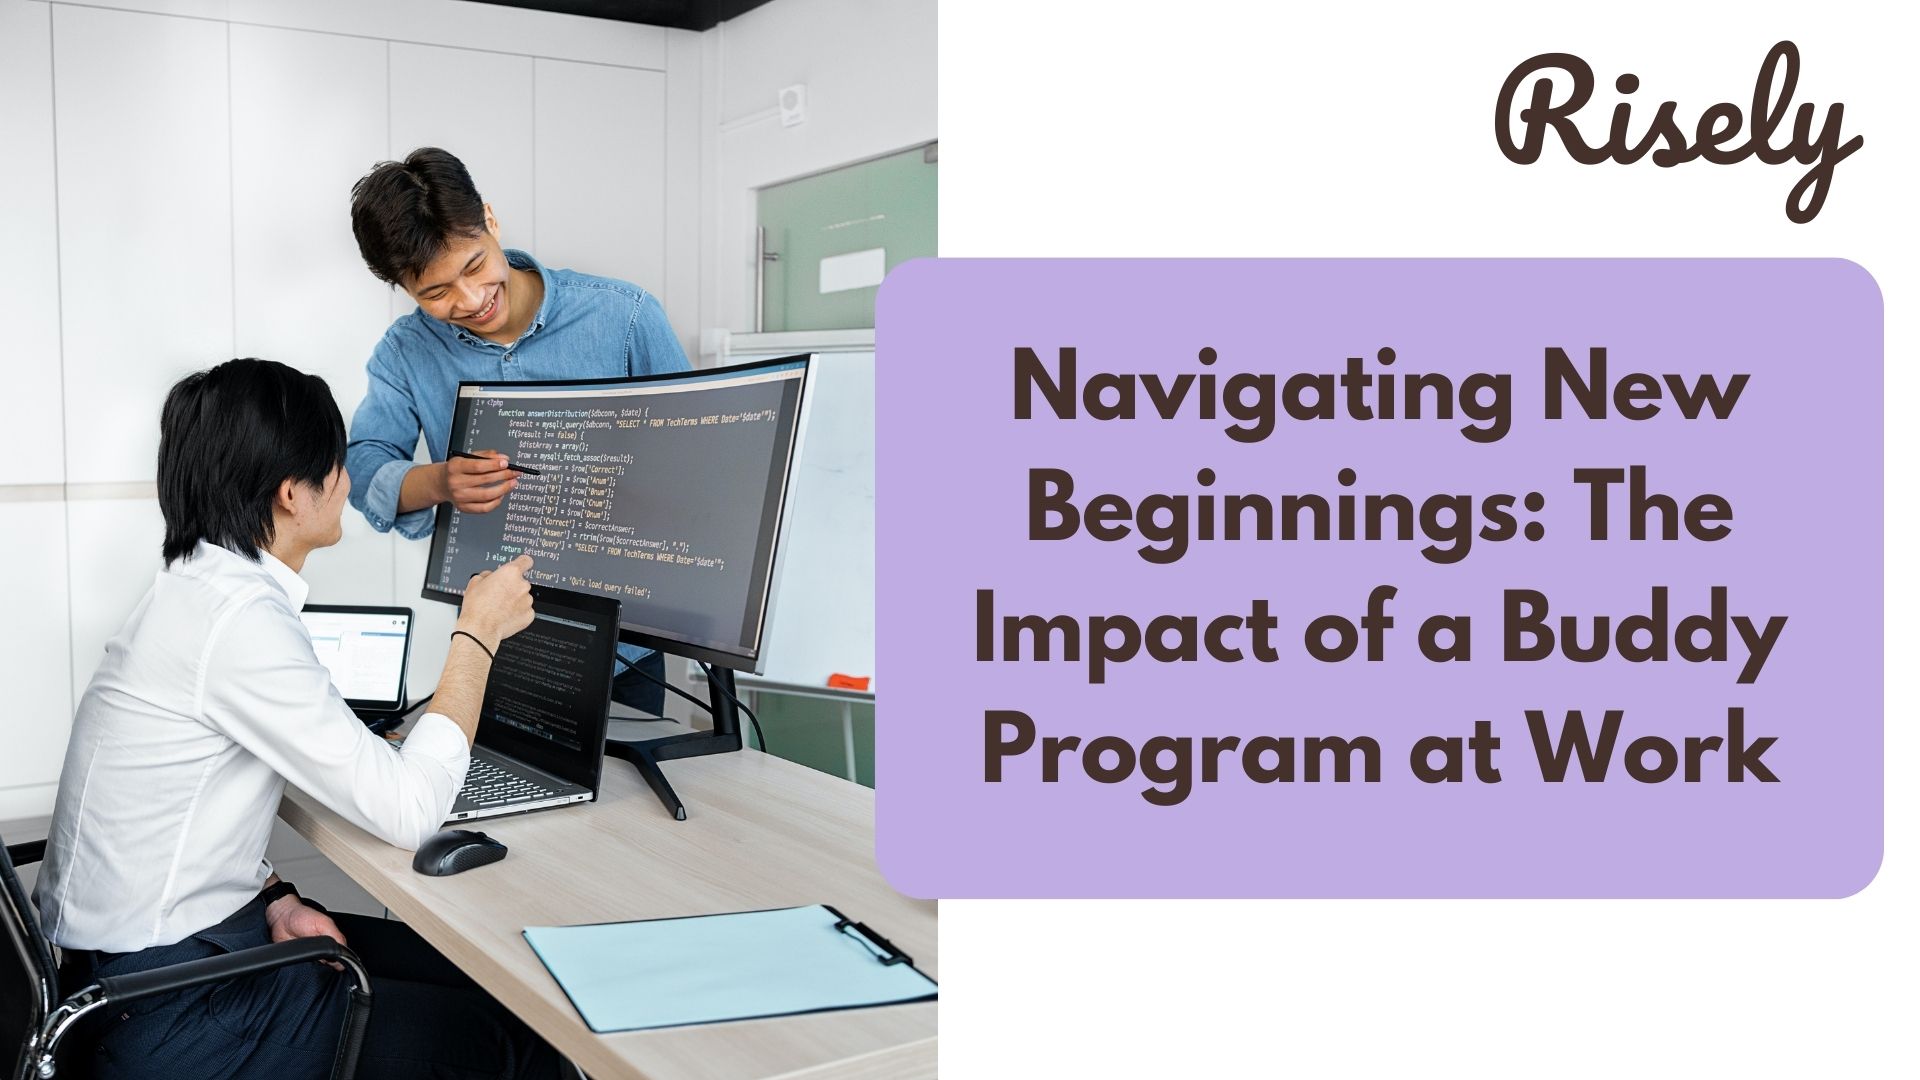 Navigating New Beginnings: The Impact of a Buddy Program at Work